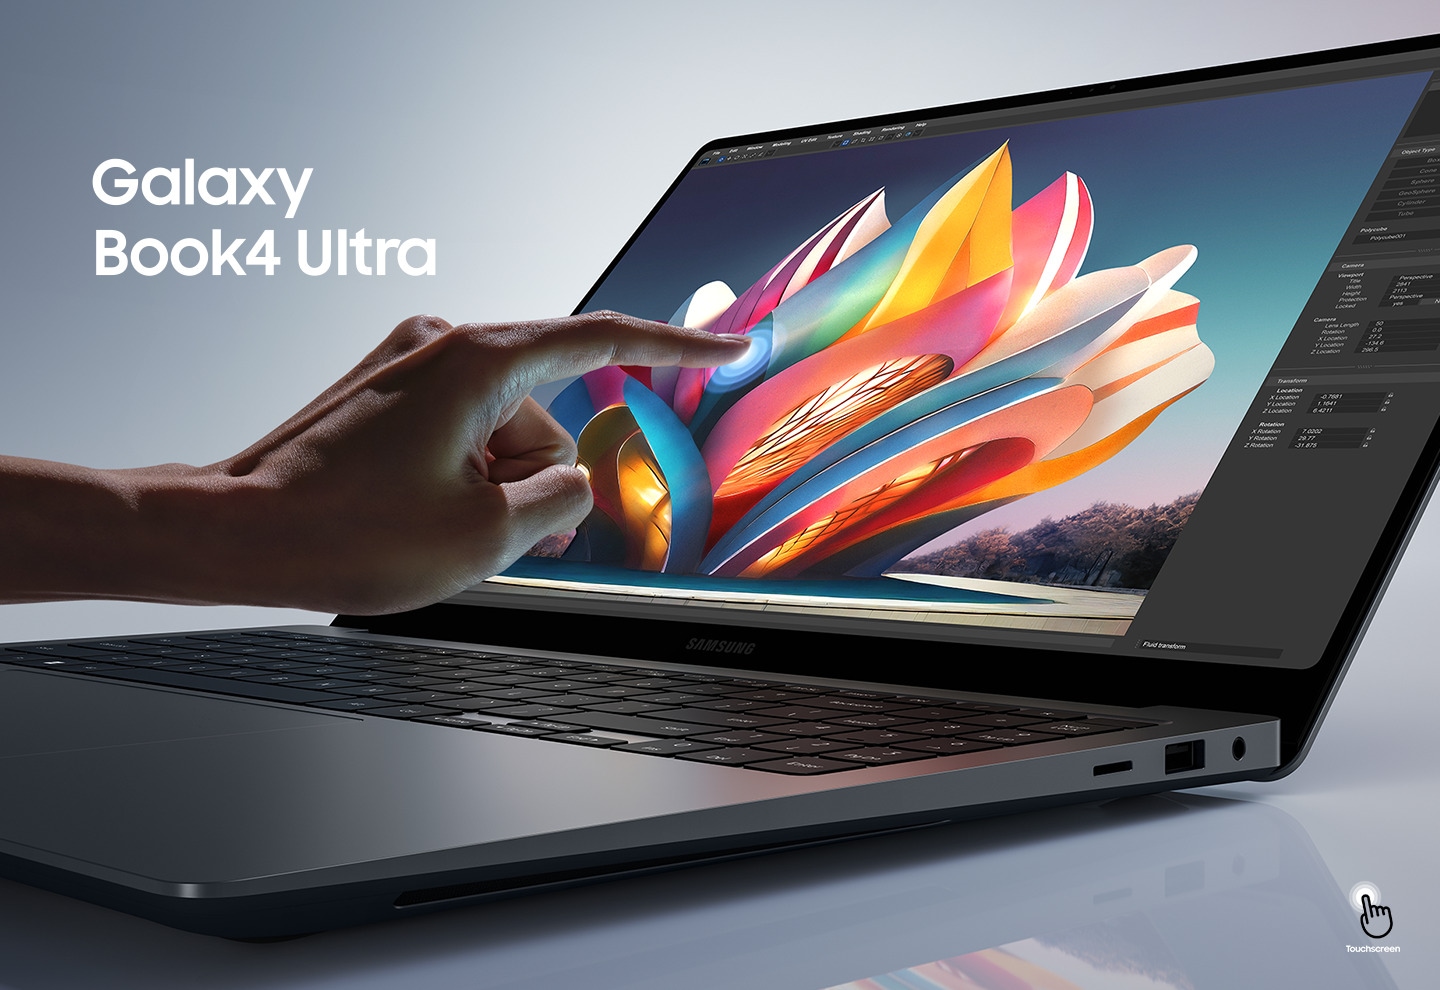 Galaxy Book4 Ultra in Moonstone Gray is open, facing slightly left with a colorful image open for editing onscreen and a person's hand touching the screen with an index finger. Touchscreen icon shown.